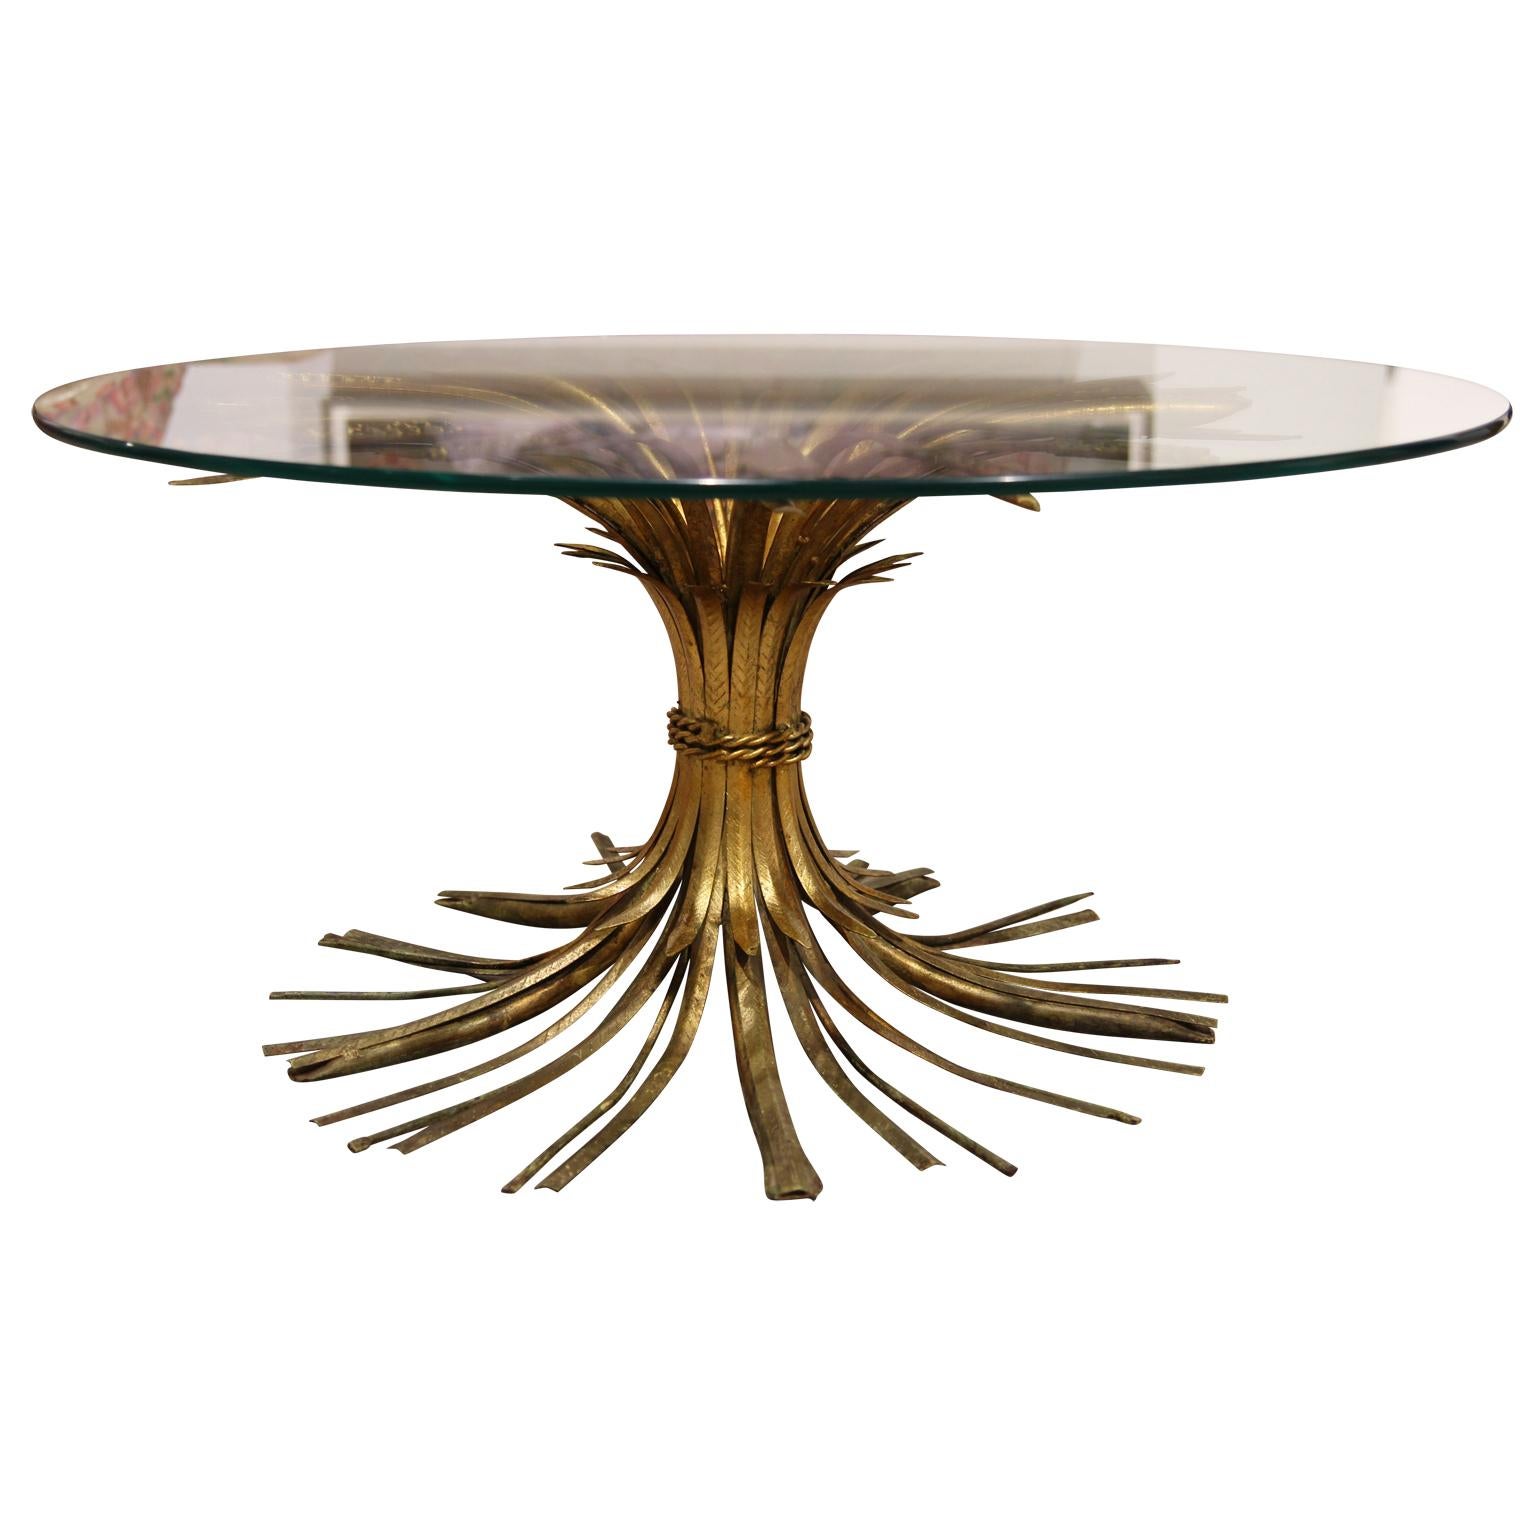 Vintage Italian gold gilt iron wheat sheaf end table with round glass top. This high style table has been made famous by the likes of Coco Chanel and Yves Saint Laurent as they both had similar tables in their French Chateaus.